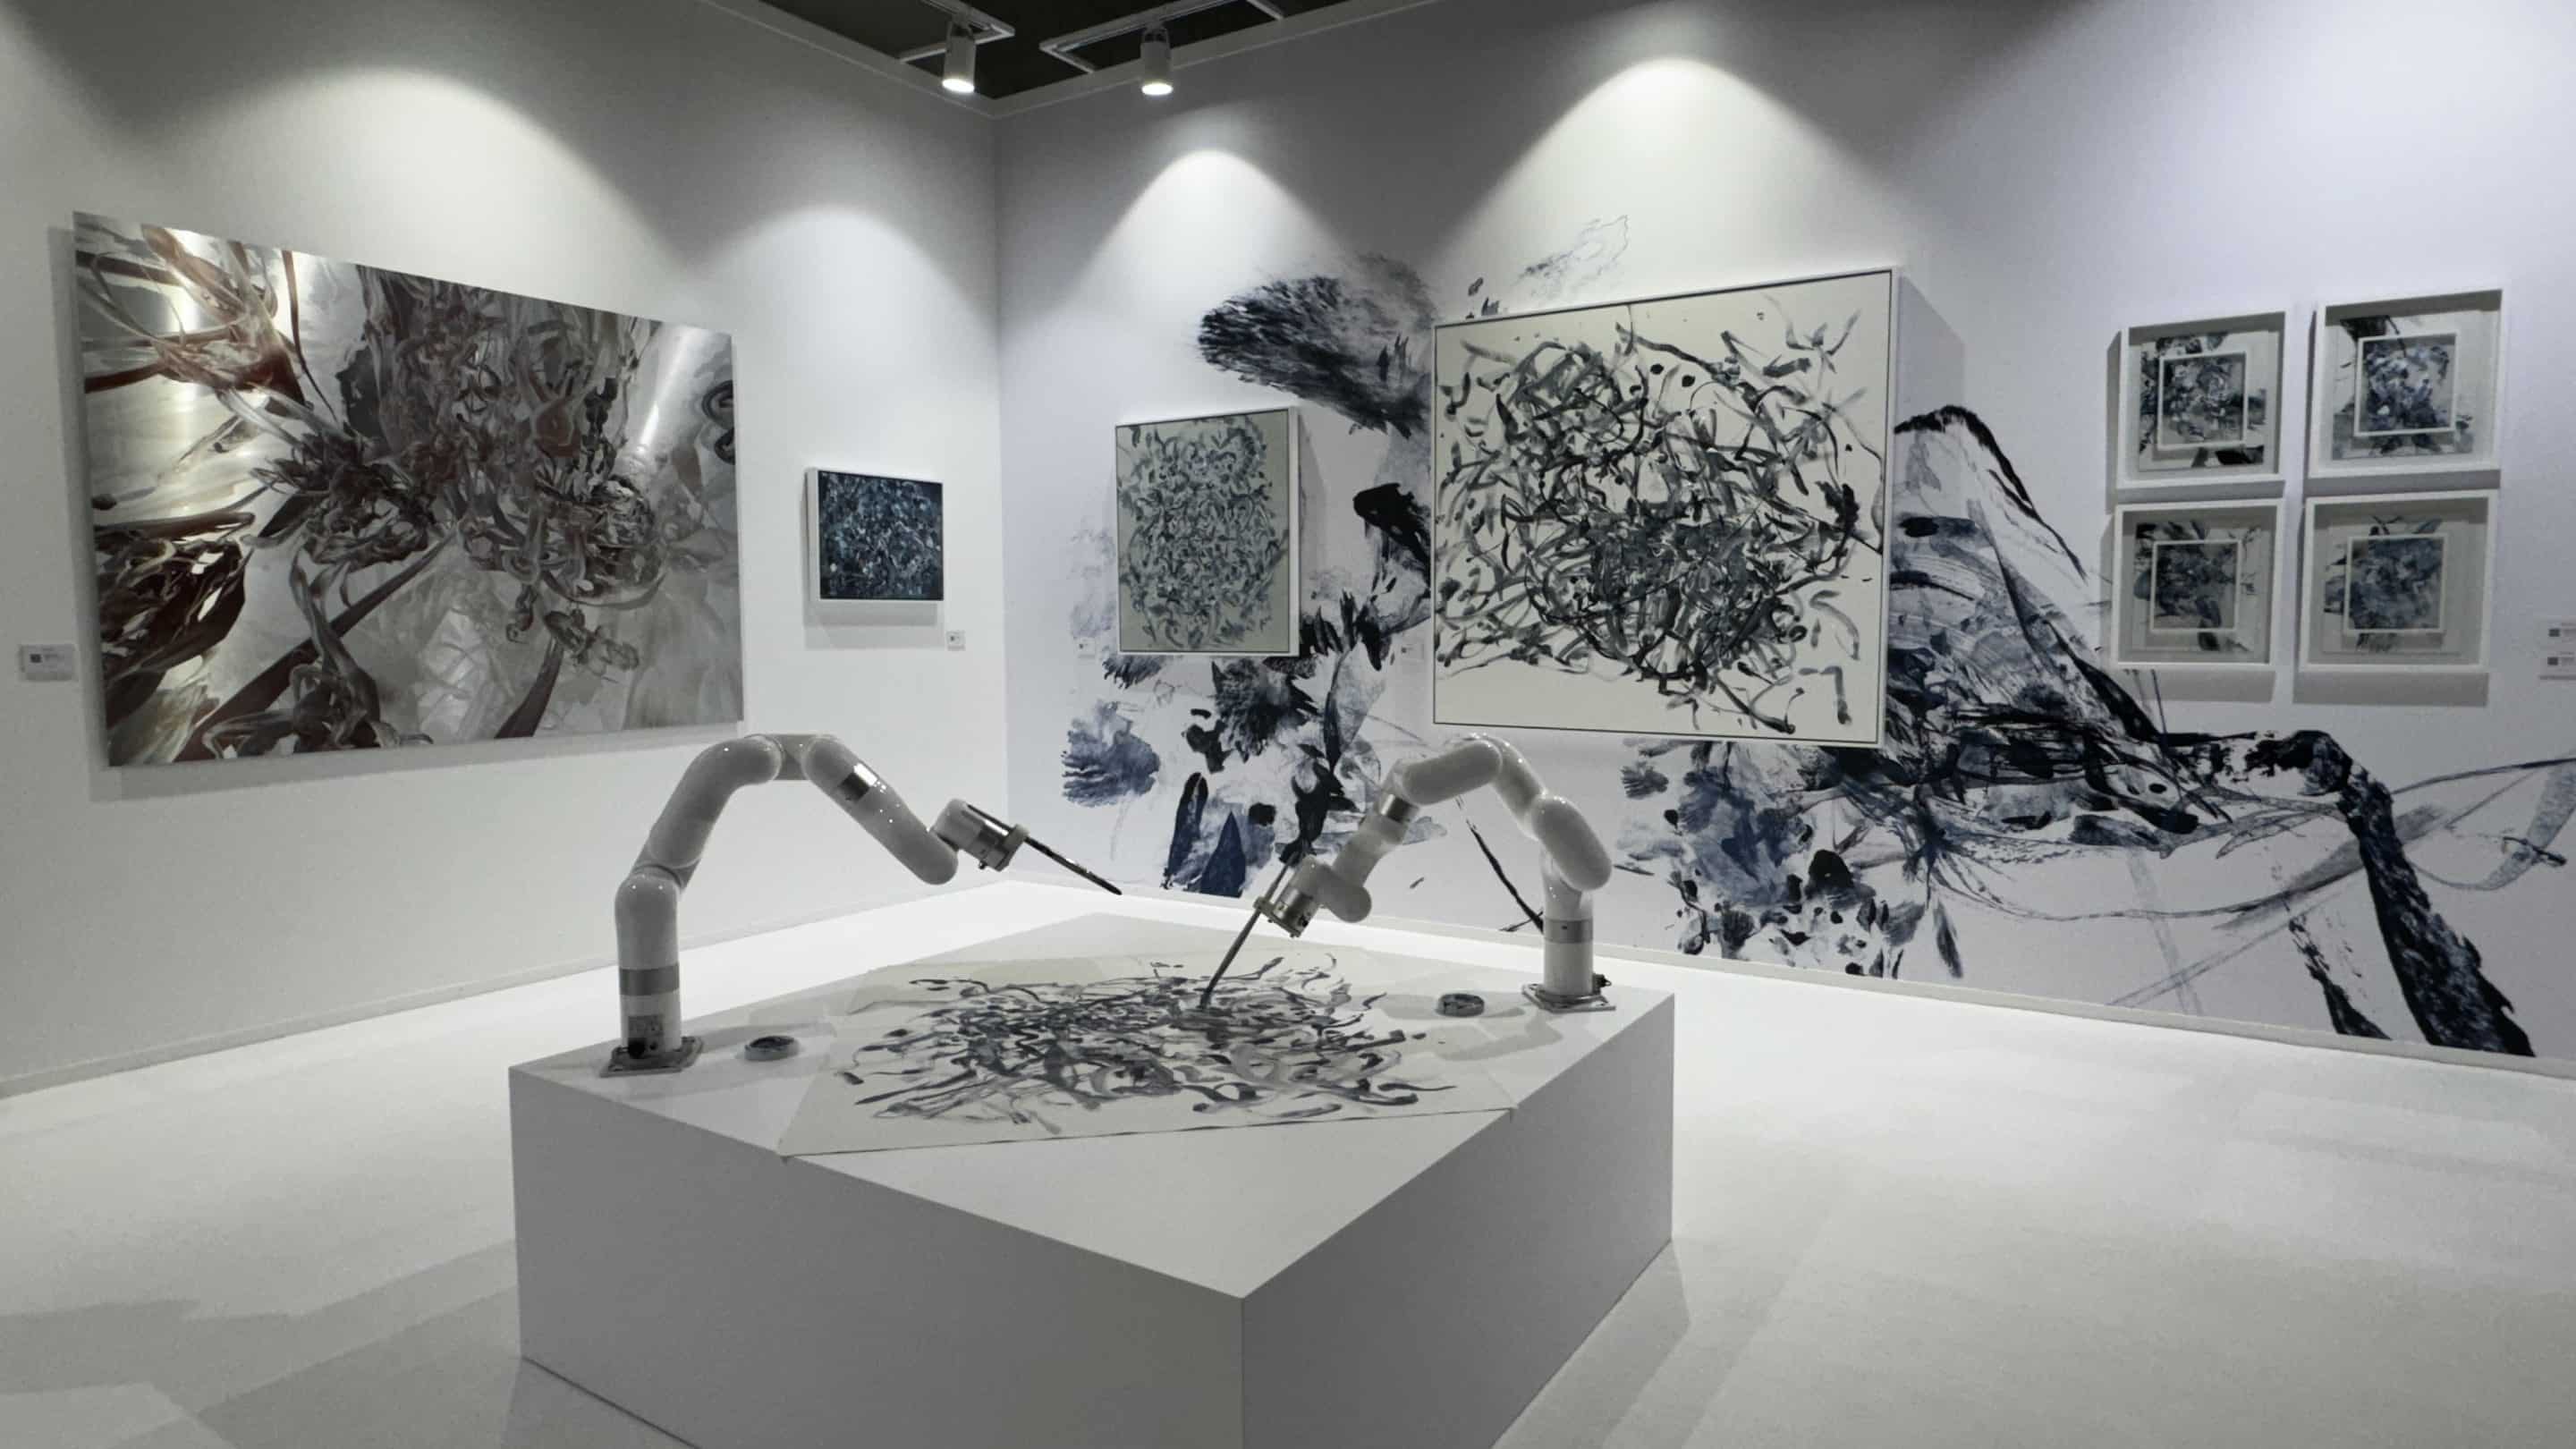 HOFA Gallery's booth with Sougwen Chung's works